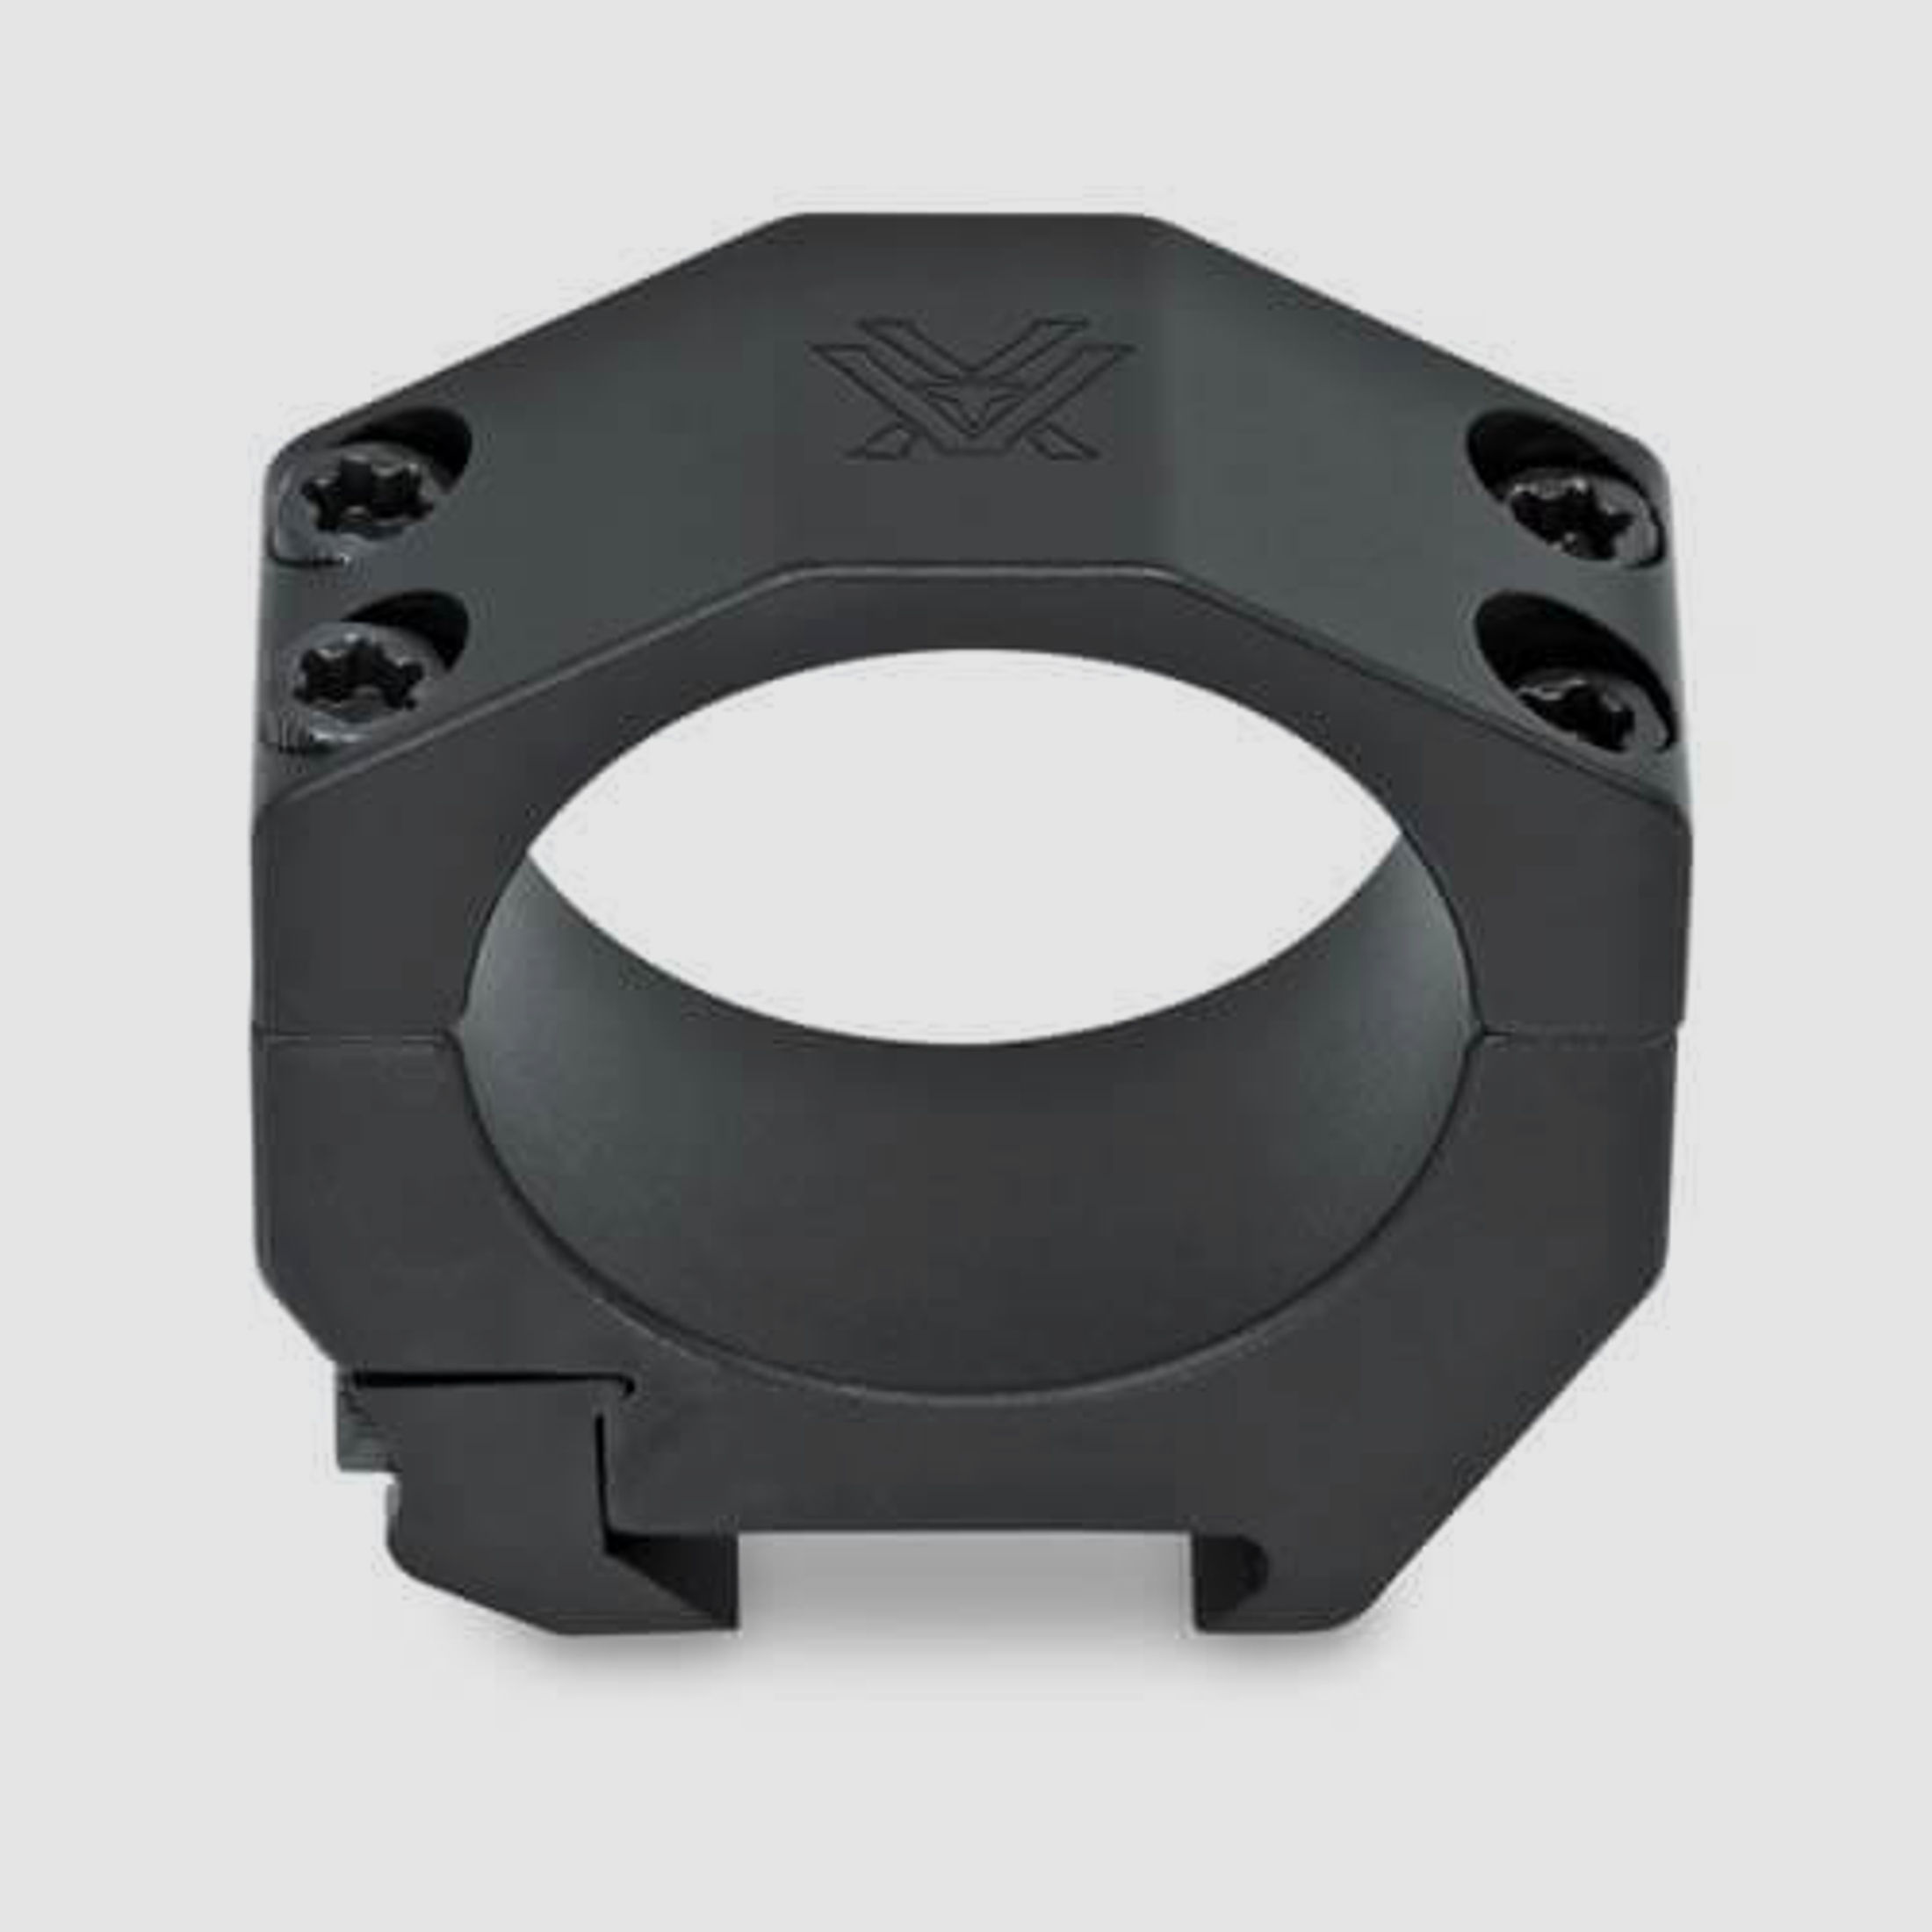 Vortex Precision Matched Rings 30 mm High Height (36,8 mm)